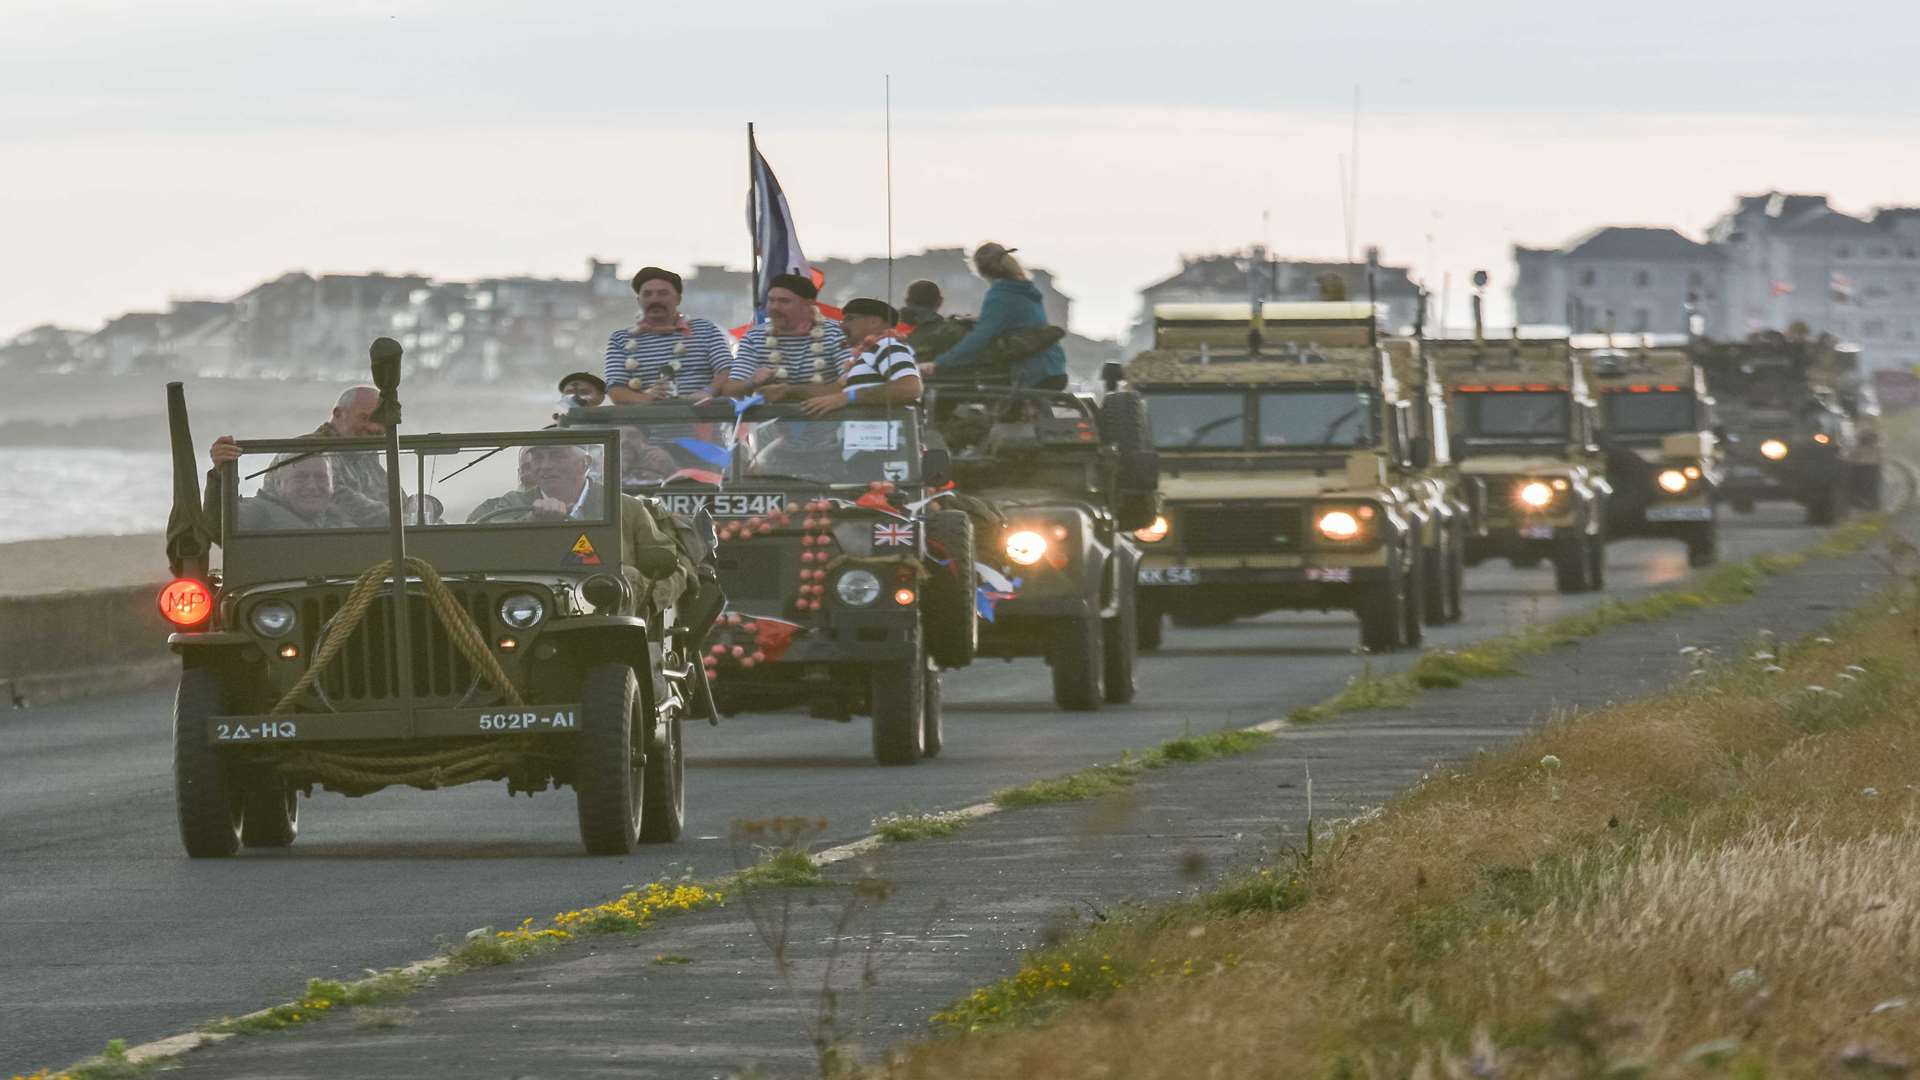 Vehicles on their way to the War and Peace Revival